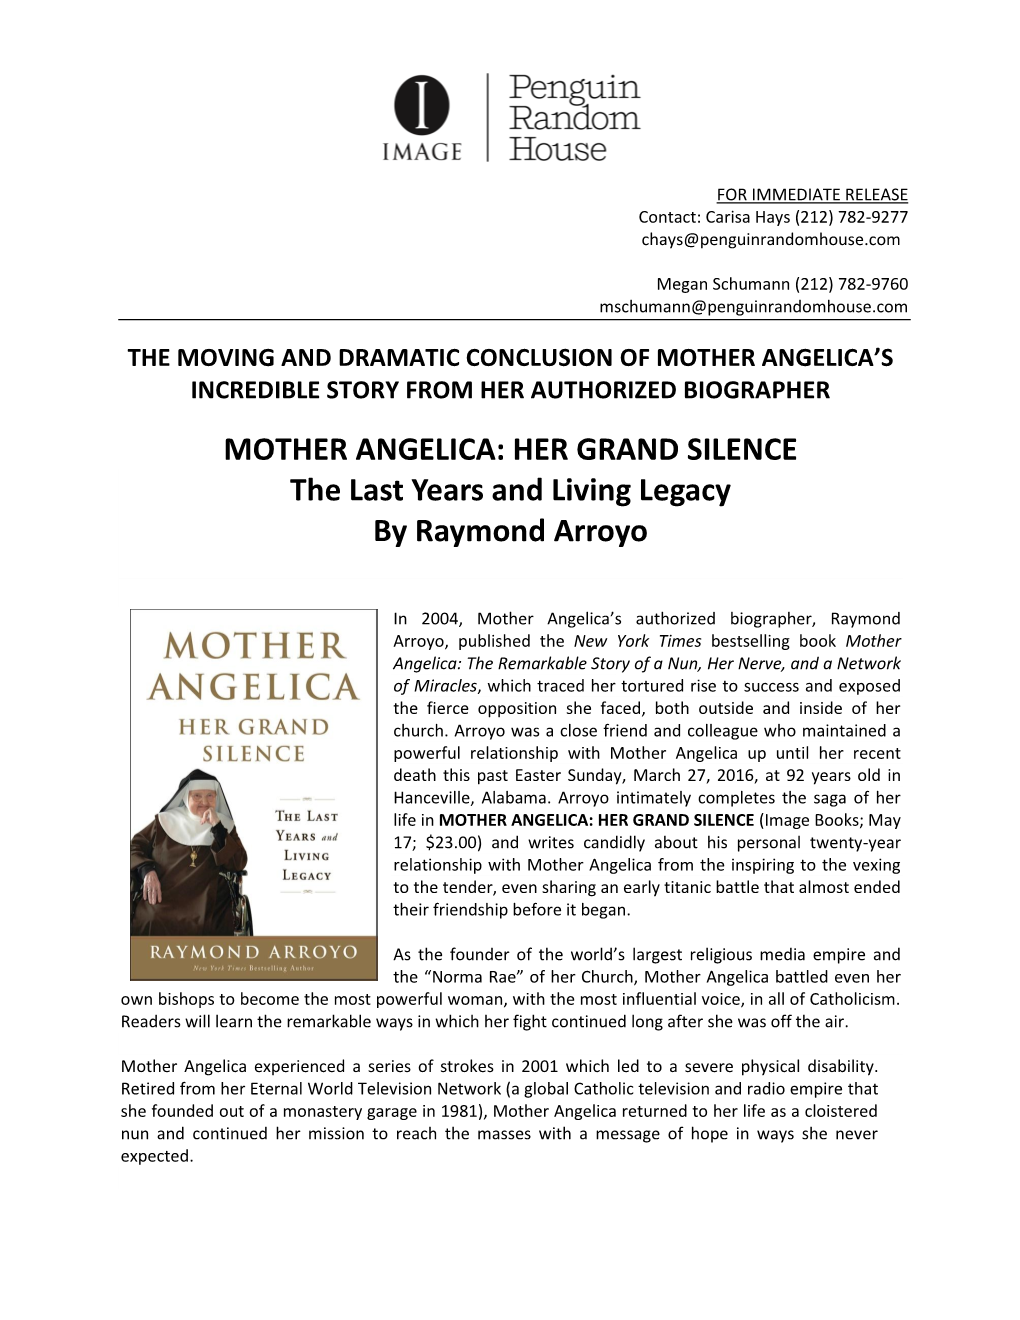 Mother Angelica Her Grand Silence Press Release